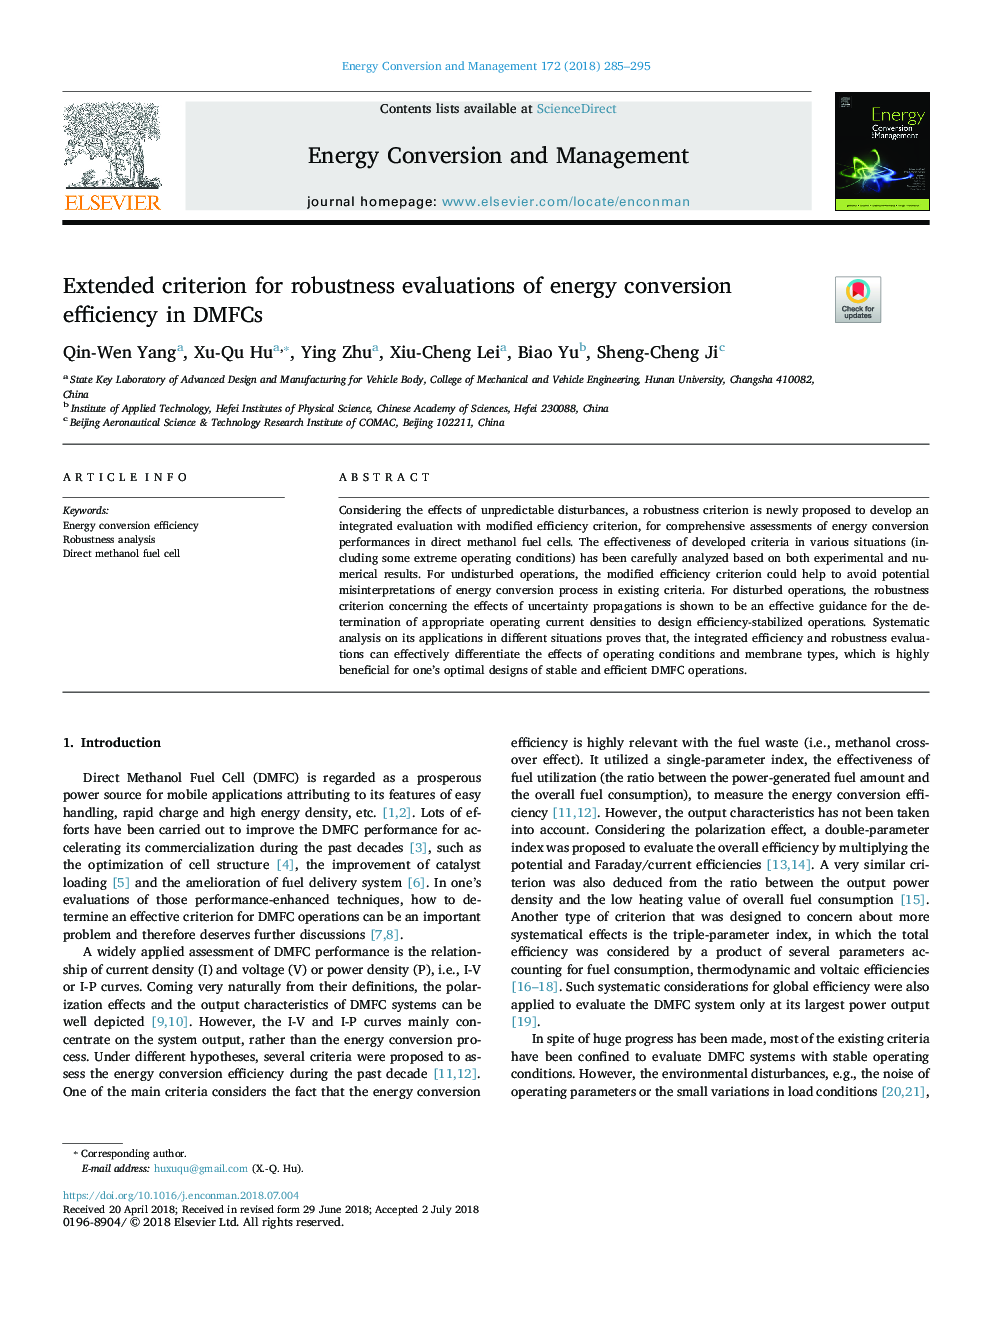 Extended criterion for robustness evaluations of energy conversion efficiency in DMFCs